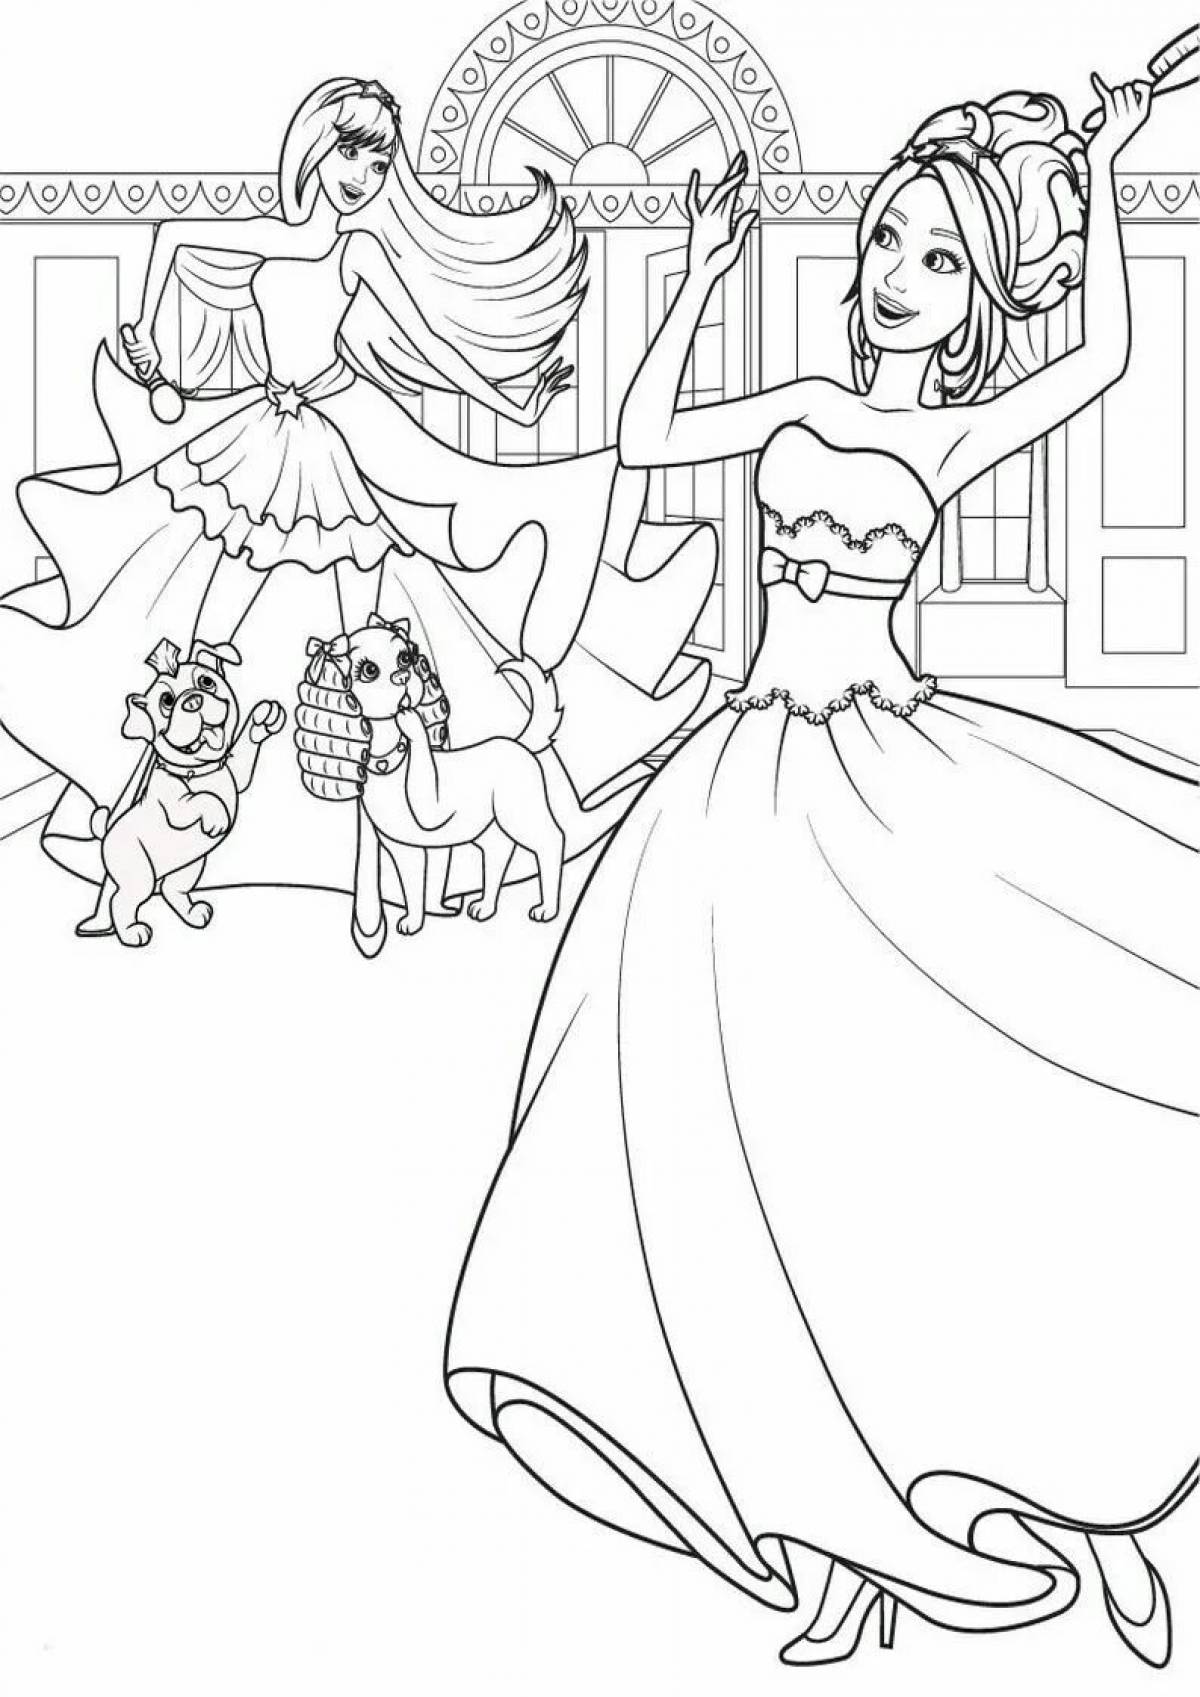 Serene coloring page include princesses